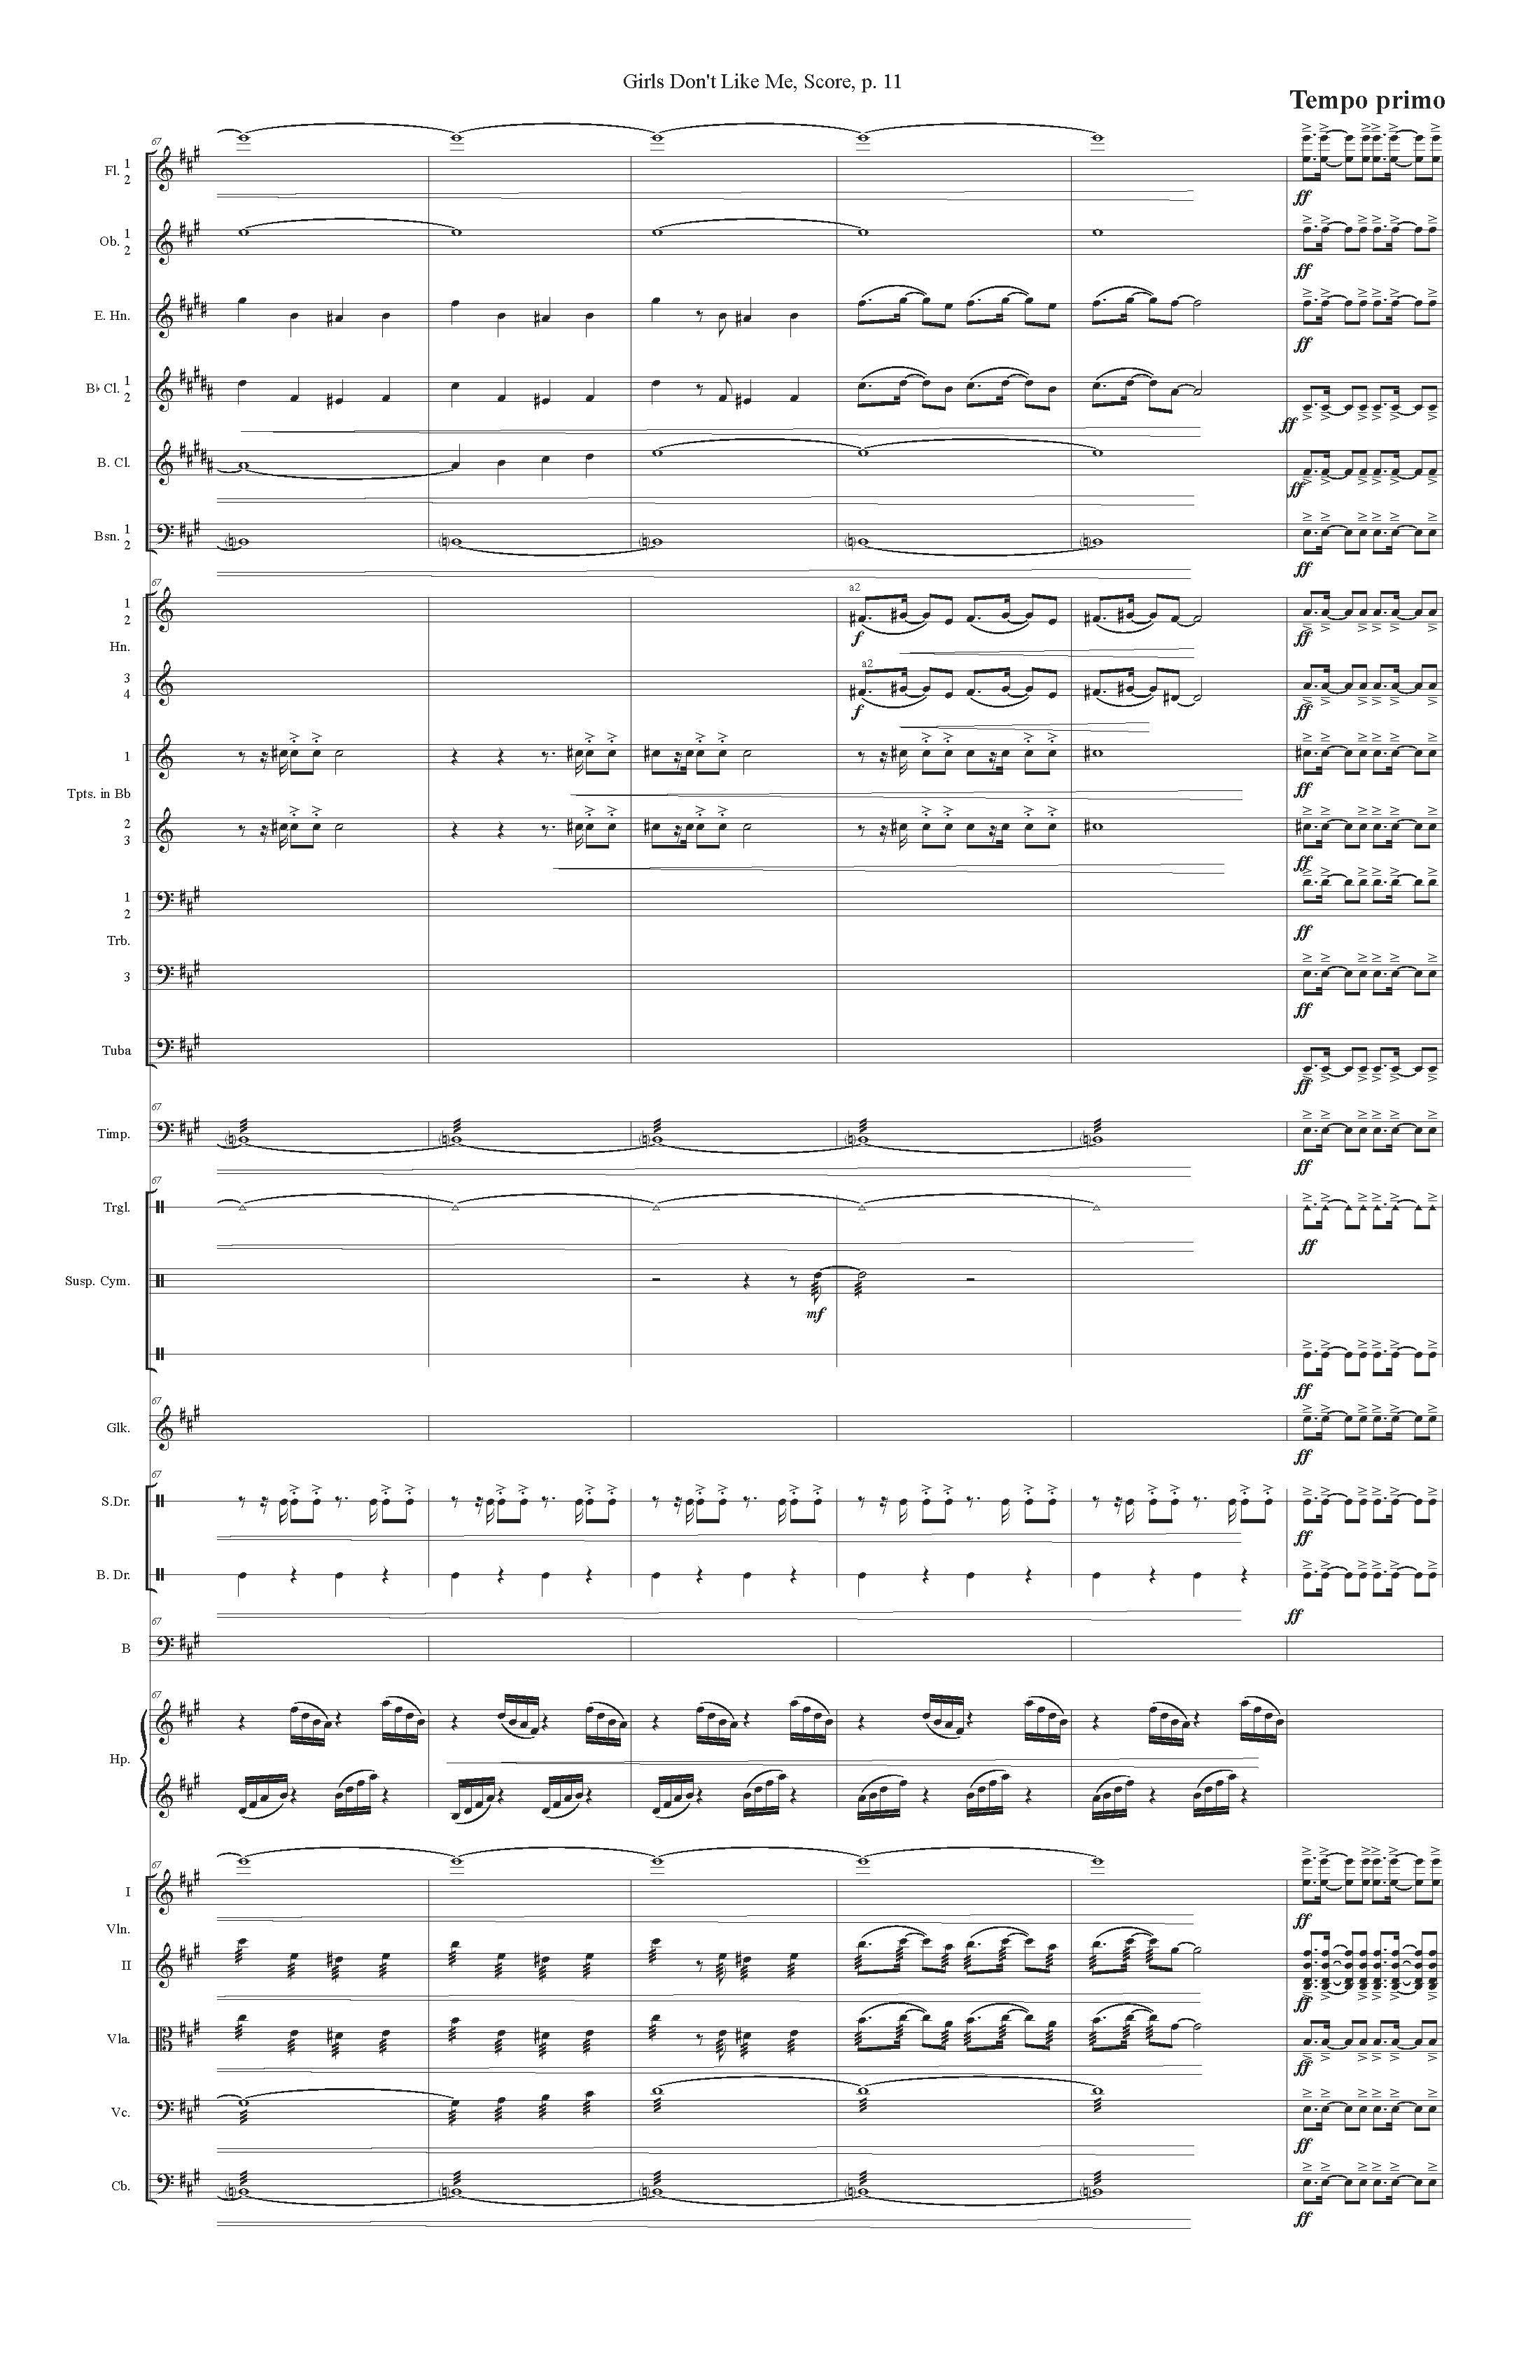 GIRLS DON'T LIKE ME ORCH - Score_Page_11.jpg